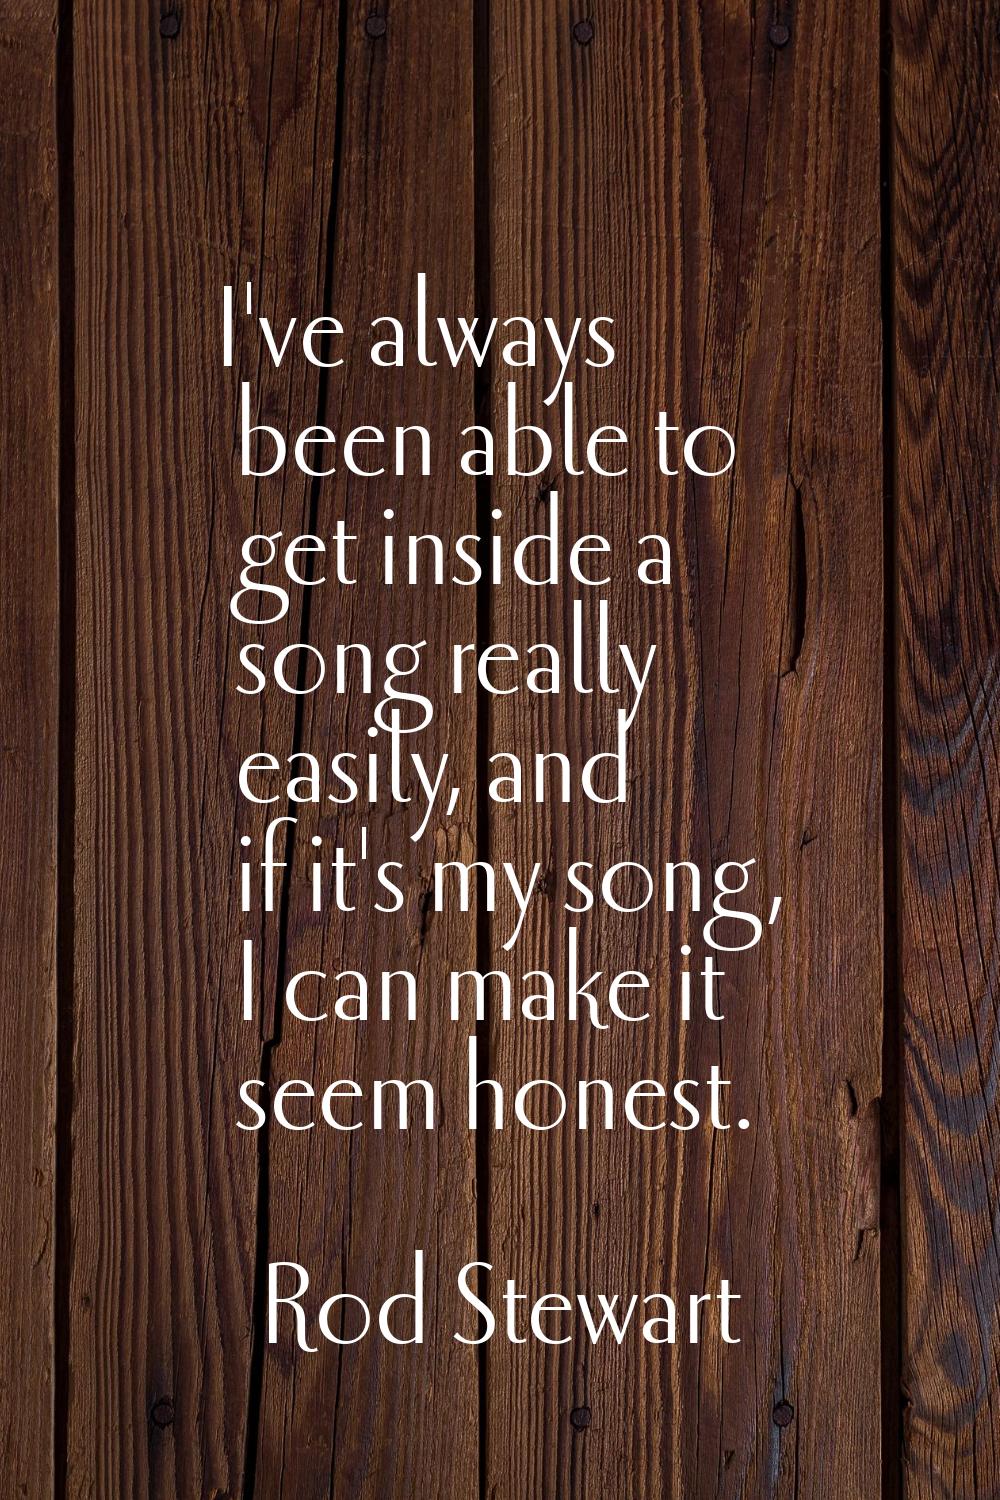 I've always been able to get inside a song really easily, and if it's my song, I can make it seem h